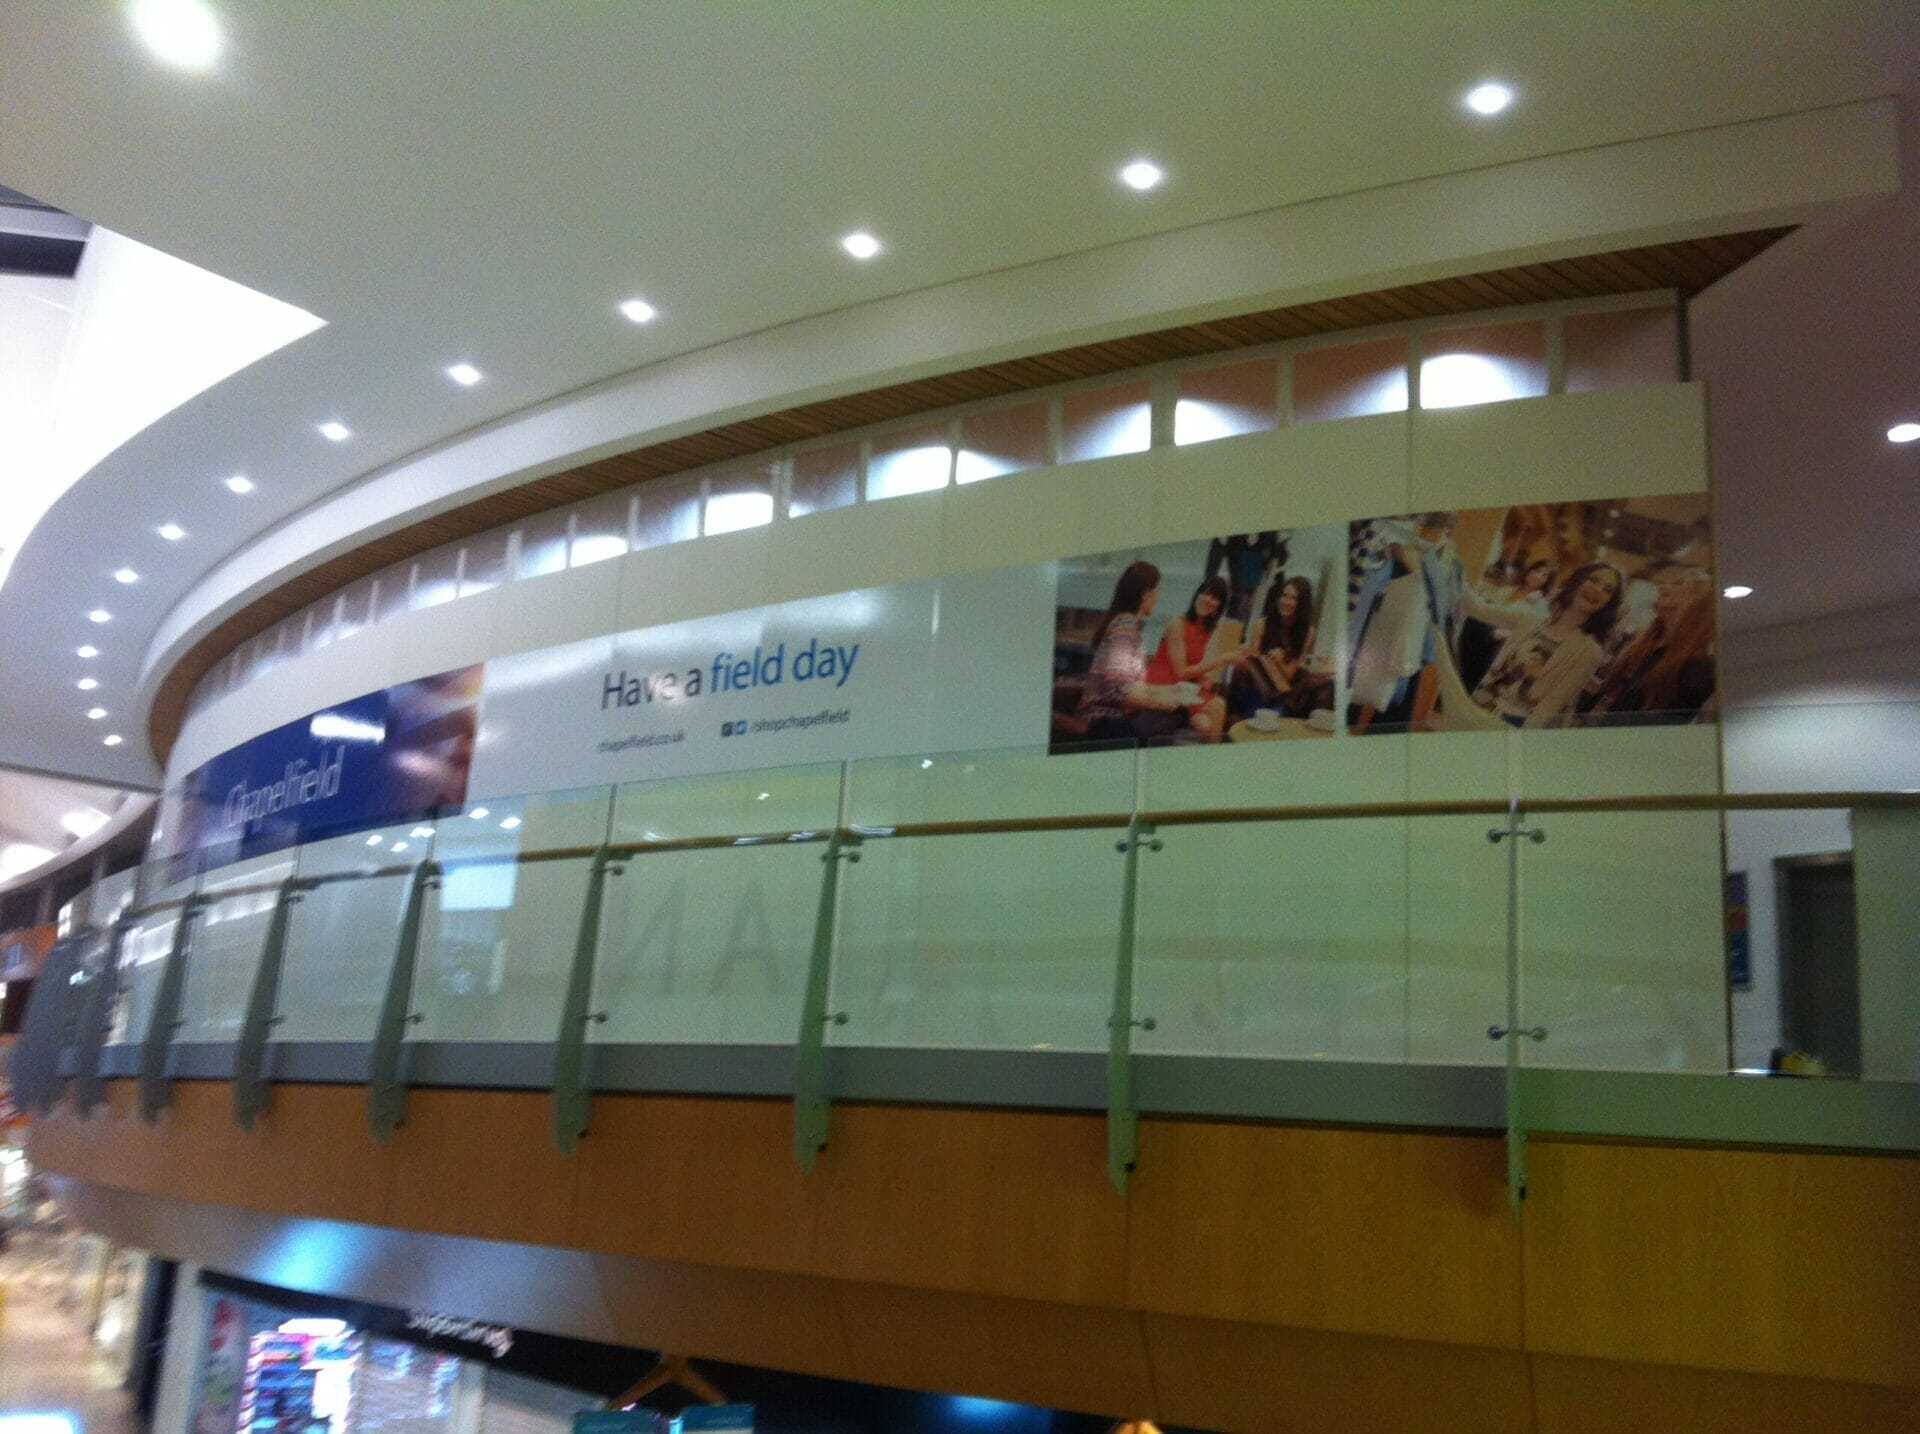 More custom vinyl wall stickers in a shopping centre